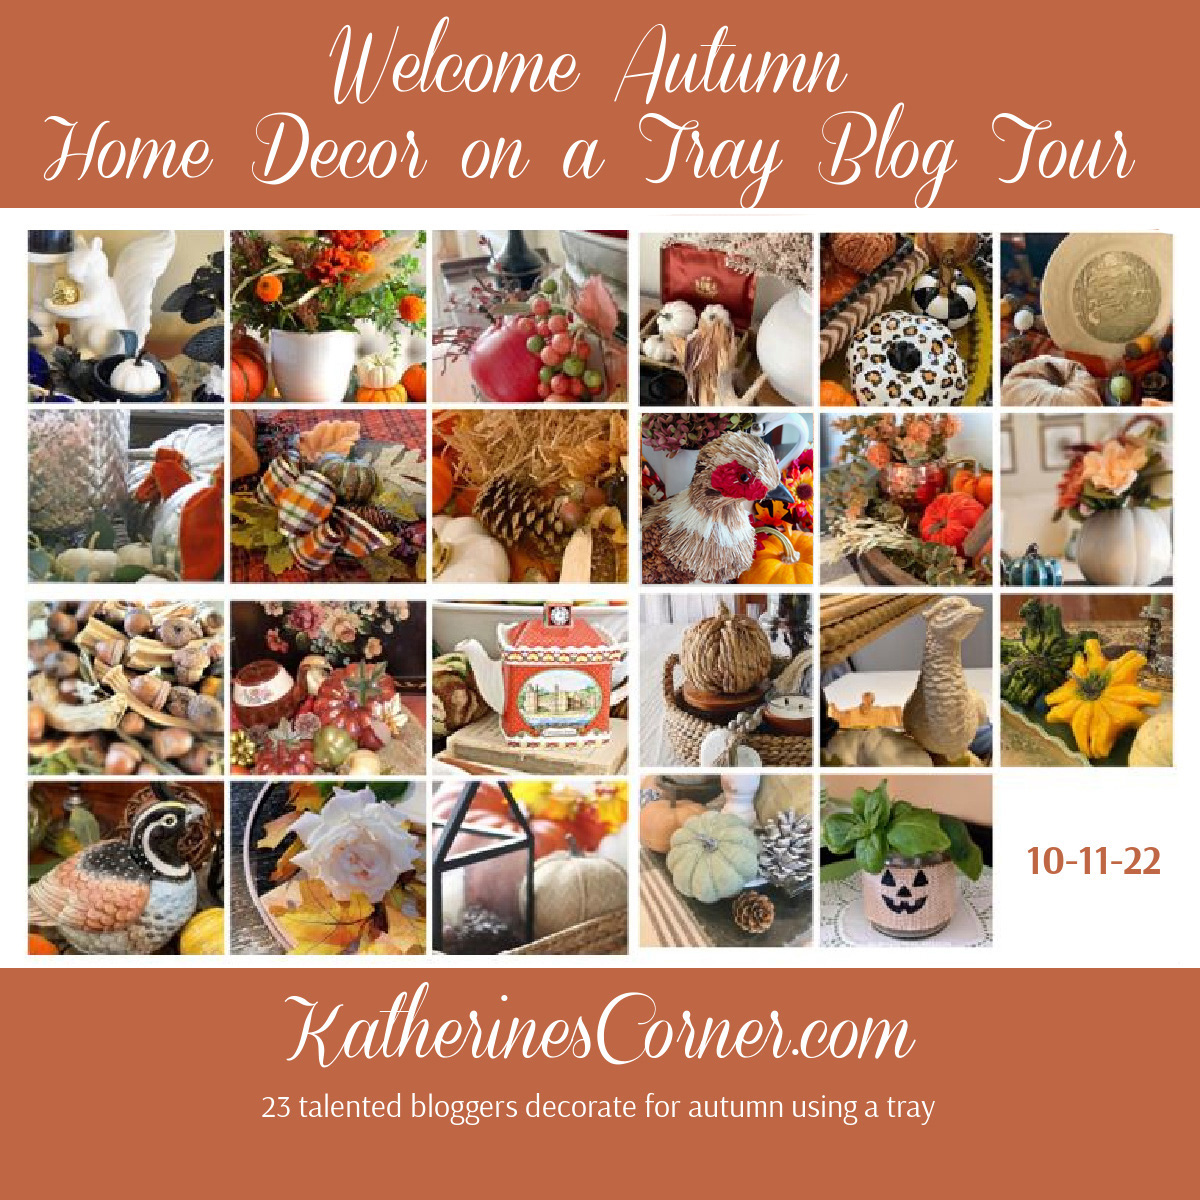 Welcome Autumn on a Tray Blog Tour